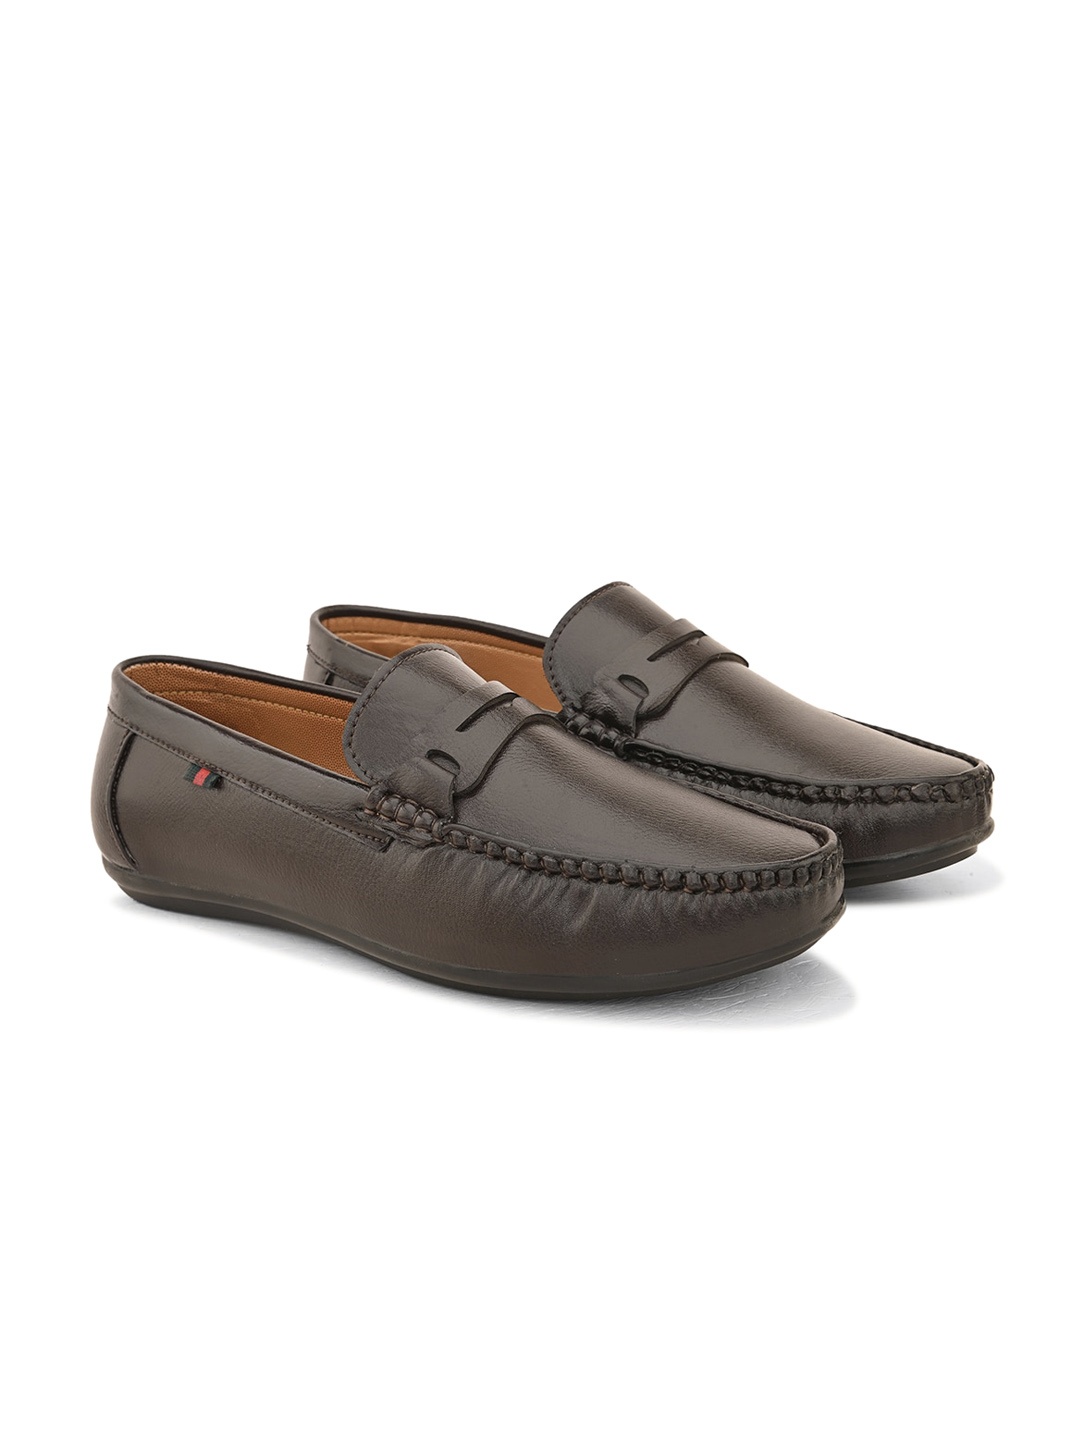 

Provogue Men Lightweight Penny Loafers, Brown